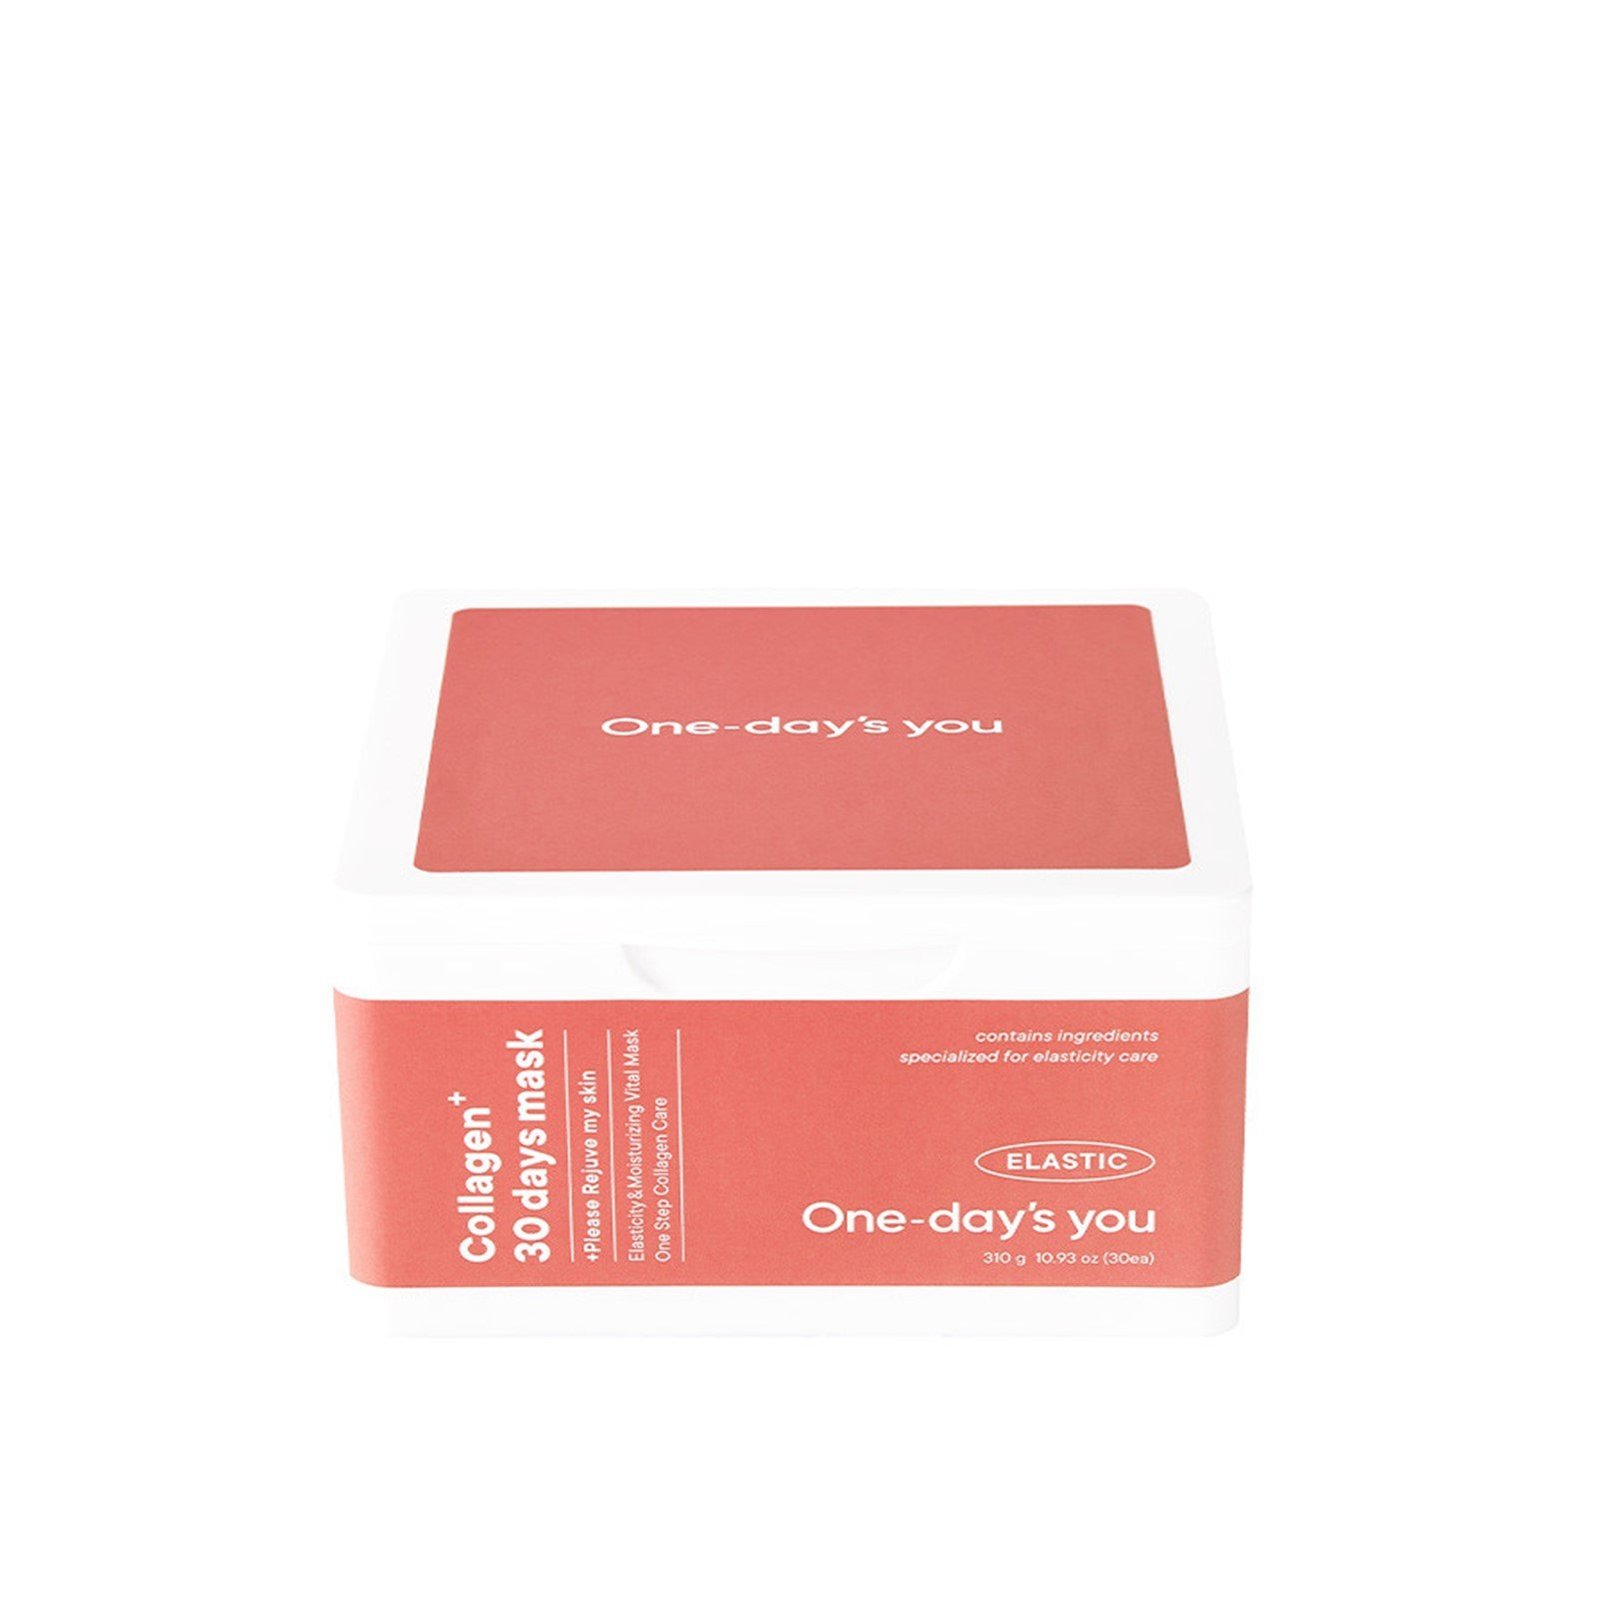 One-day's you Collagen 30 Days Mask x30